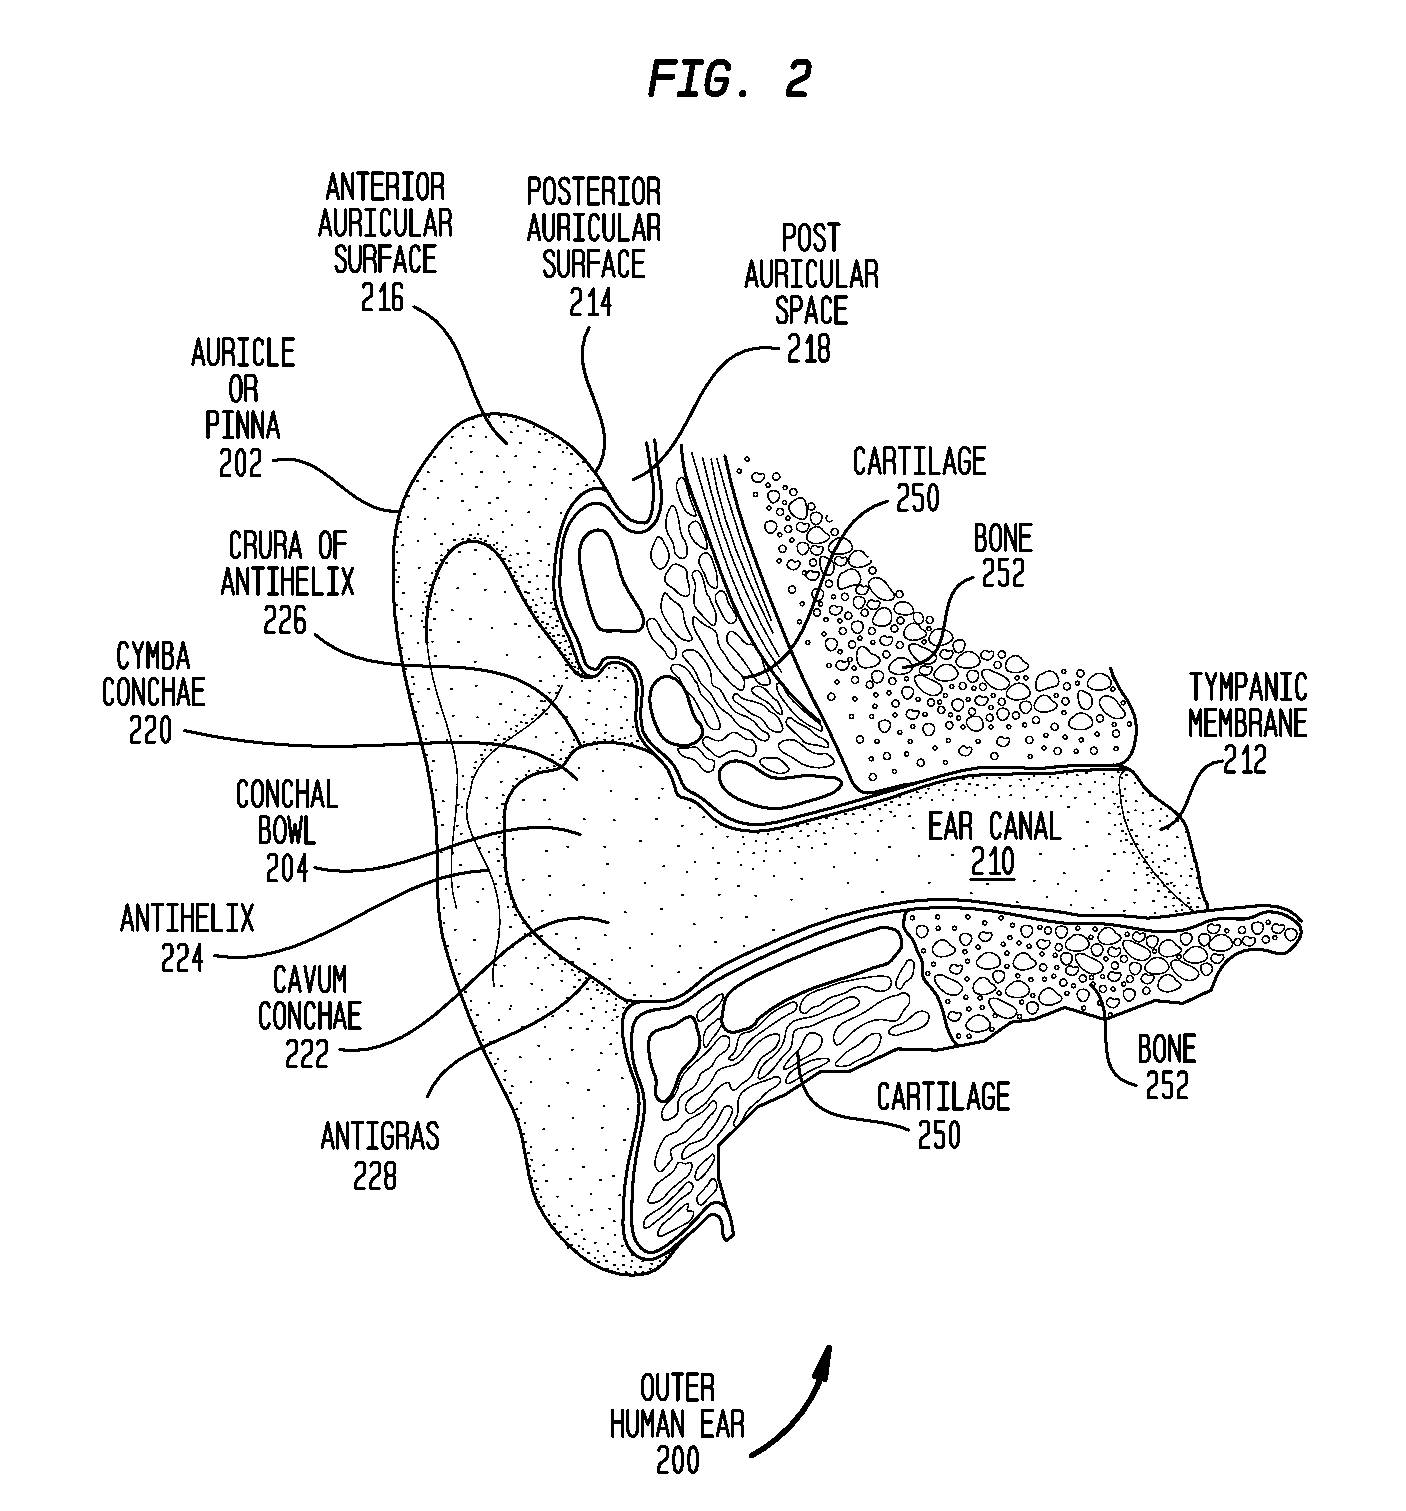 Hearing device having one or more in-the-canal vibrating extensions